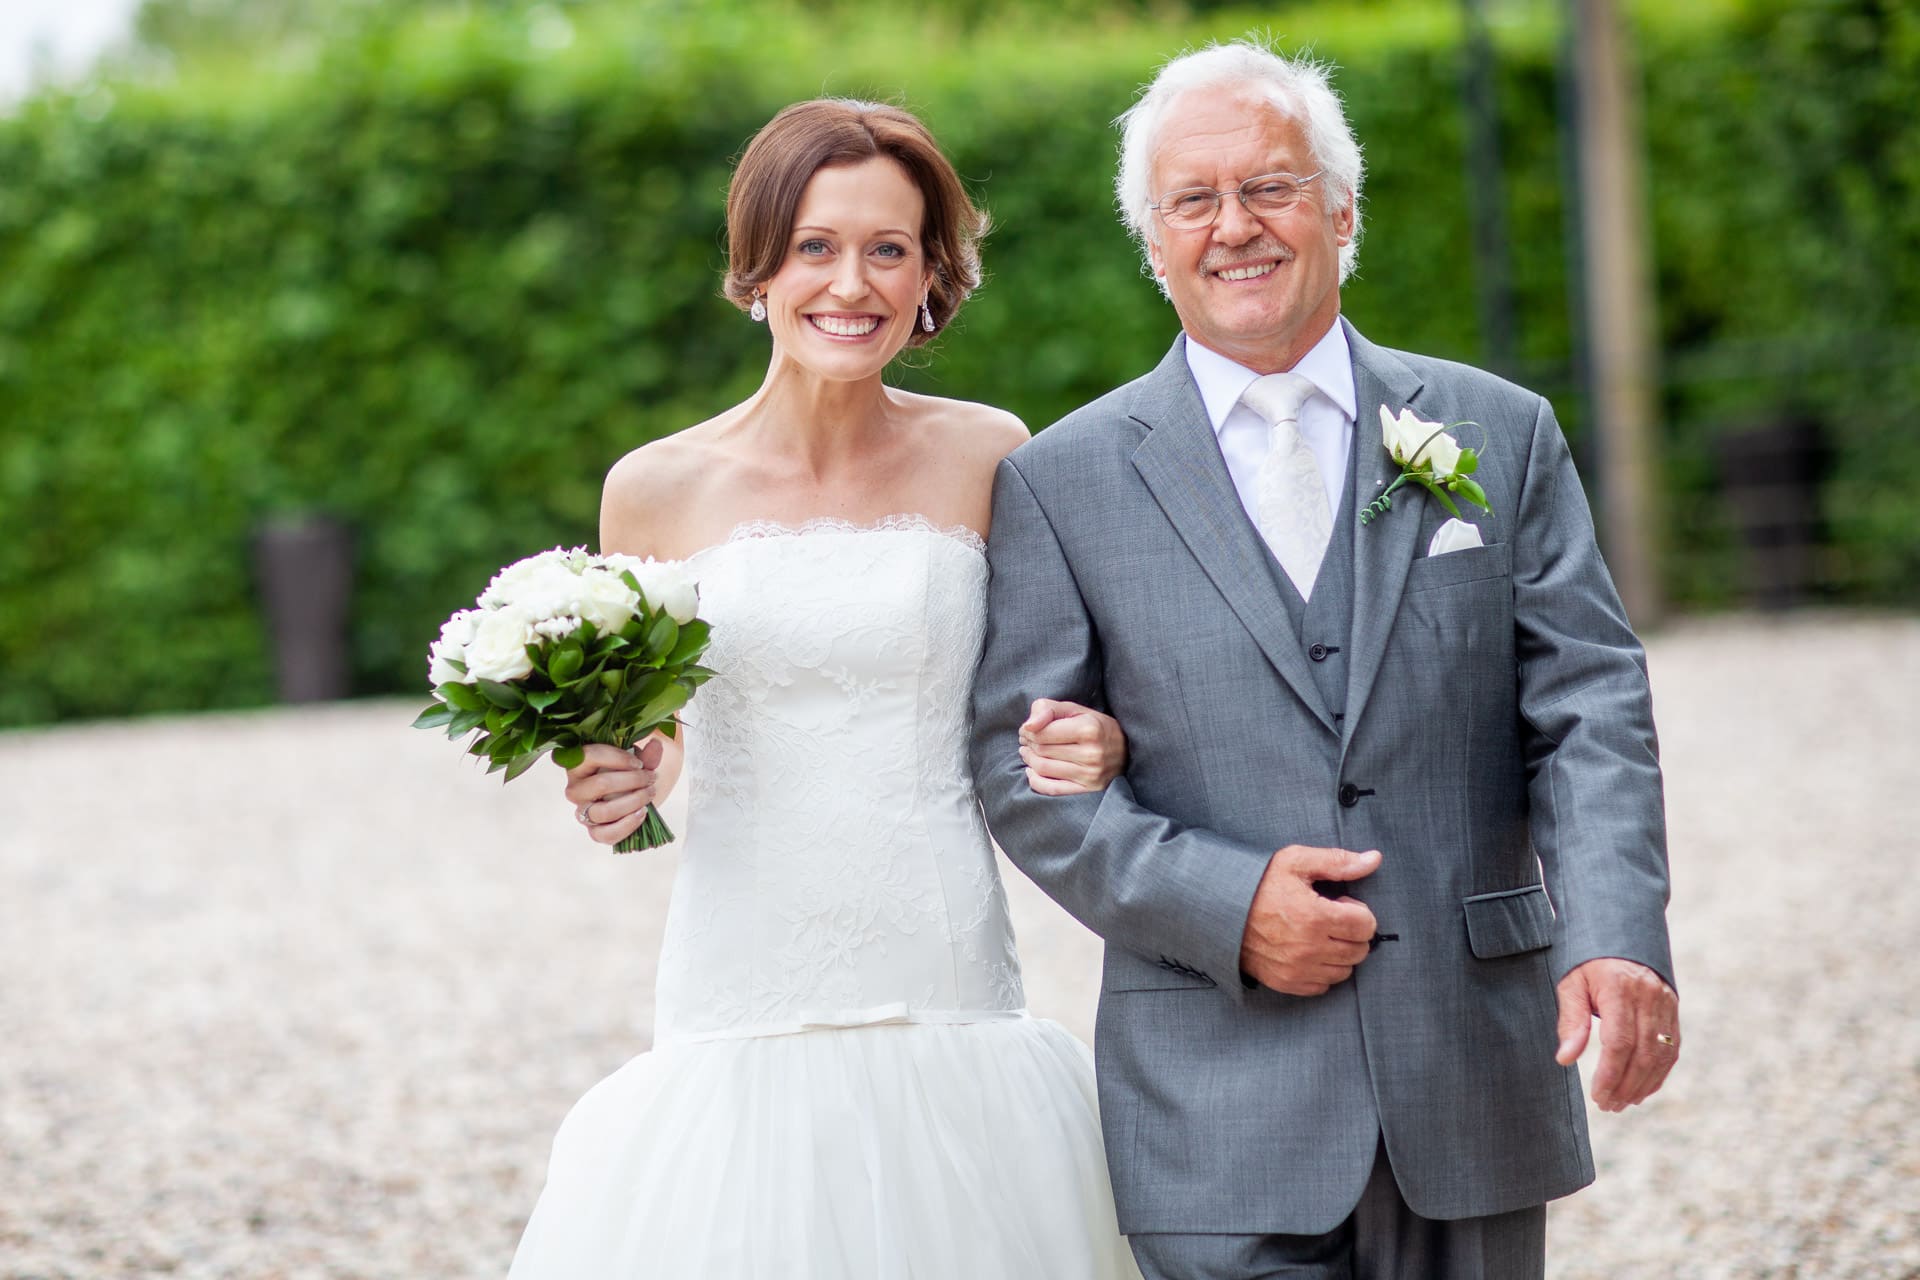 Bride and her dad arm in arm